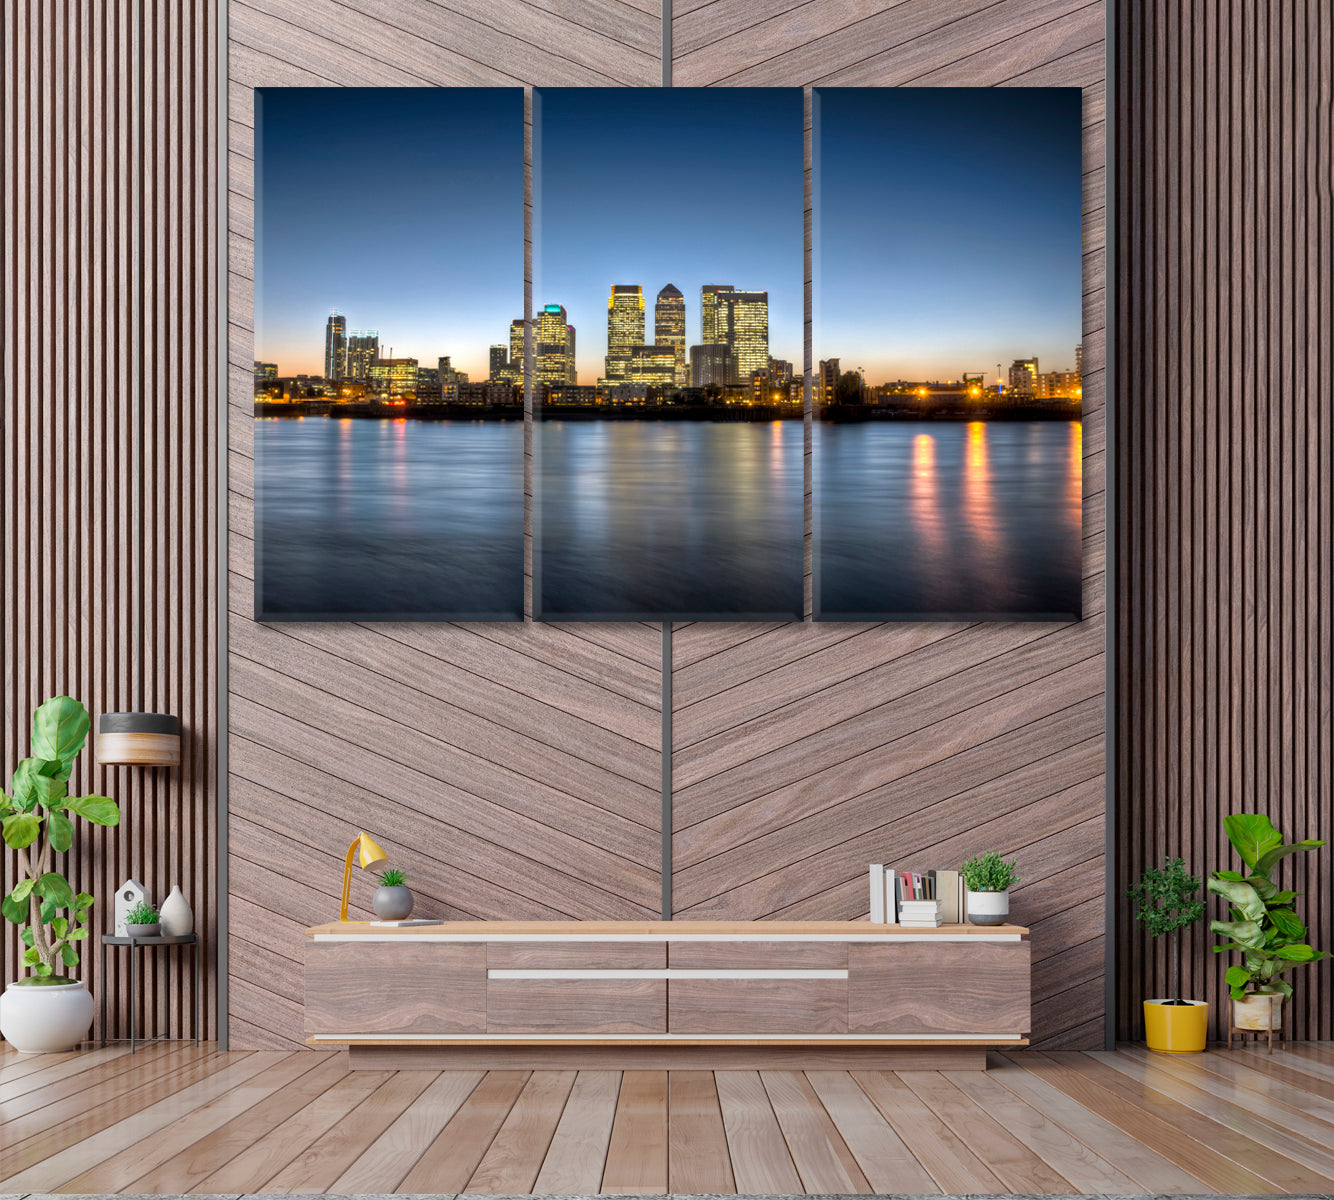 Canary Wharf Financial District London Canvas Print ArtLexy 3 Panels 36"x24" inches 